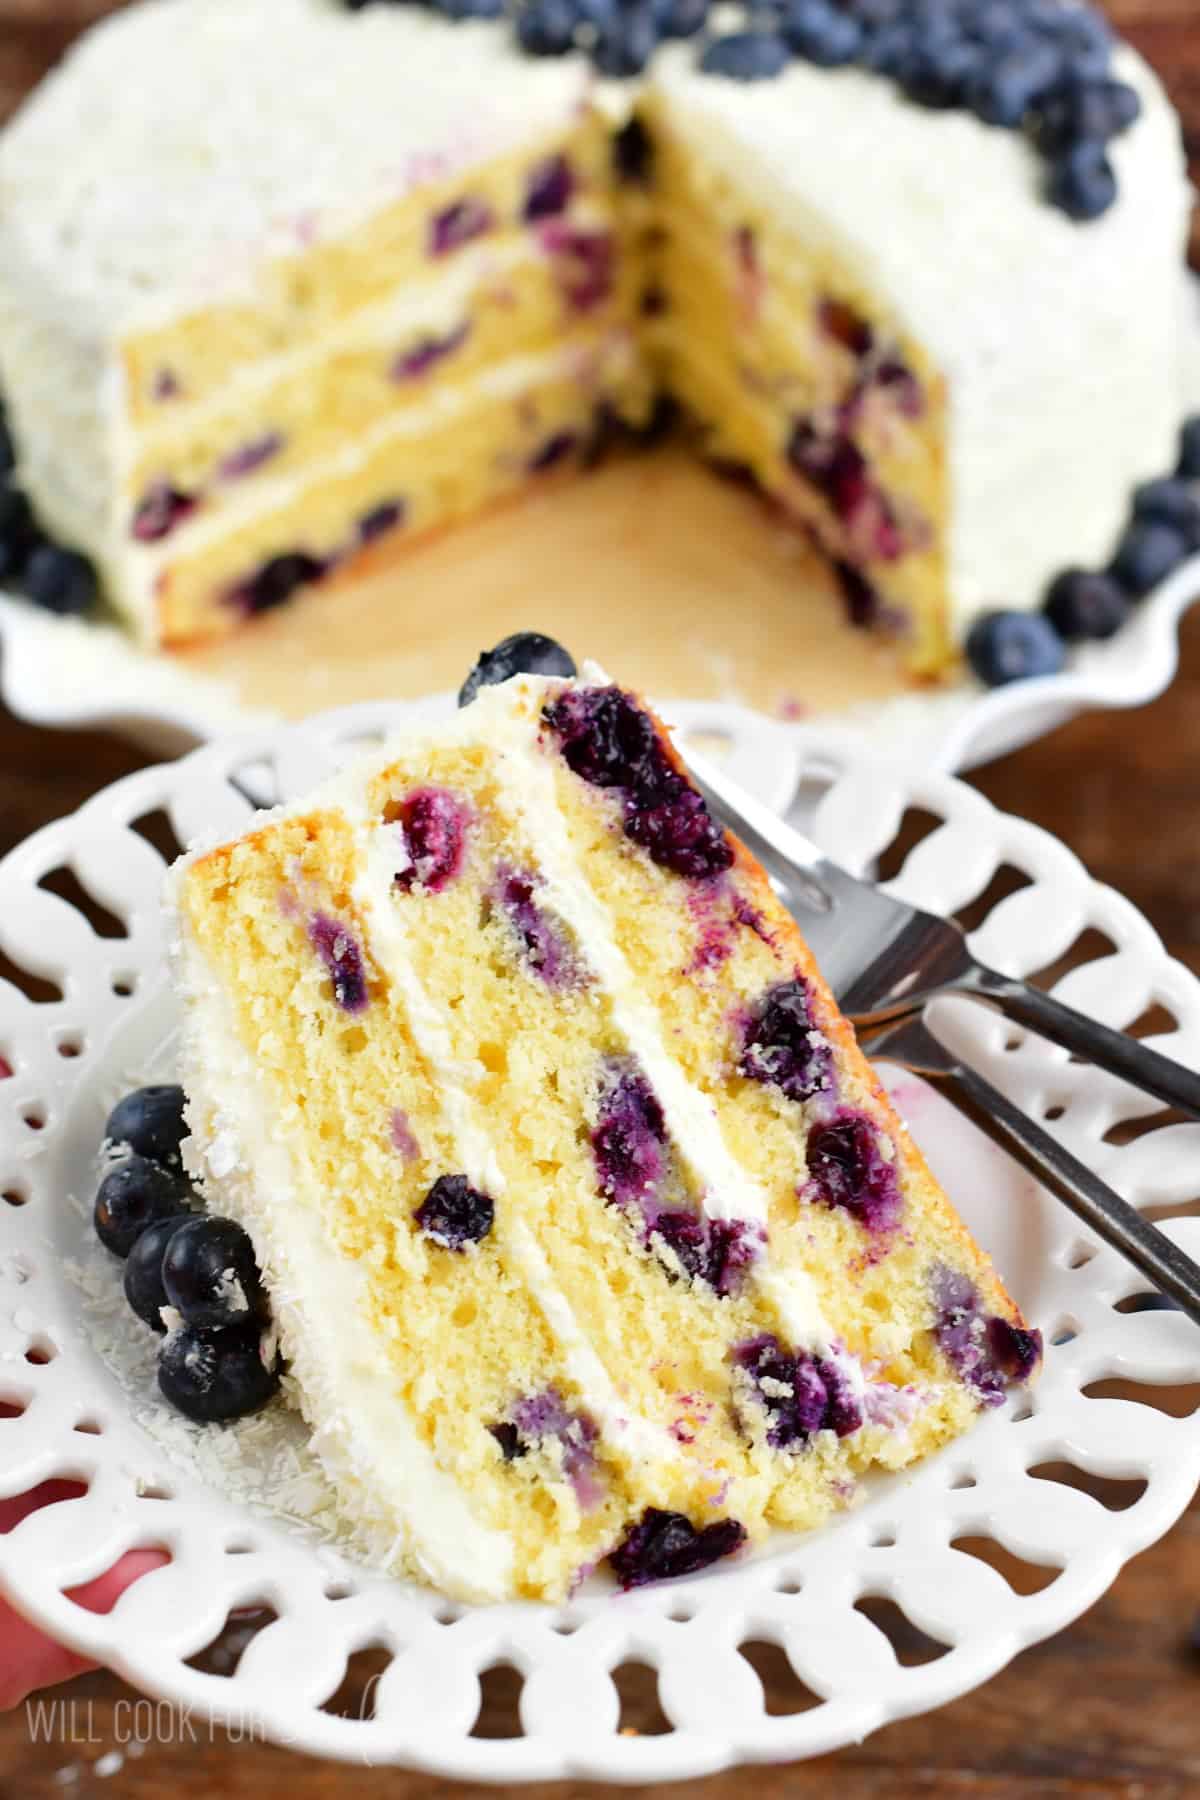 A slice of blueberry cake on a plate with the rest of the cake next to it on a cake stand.